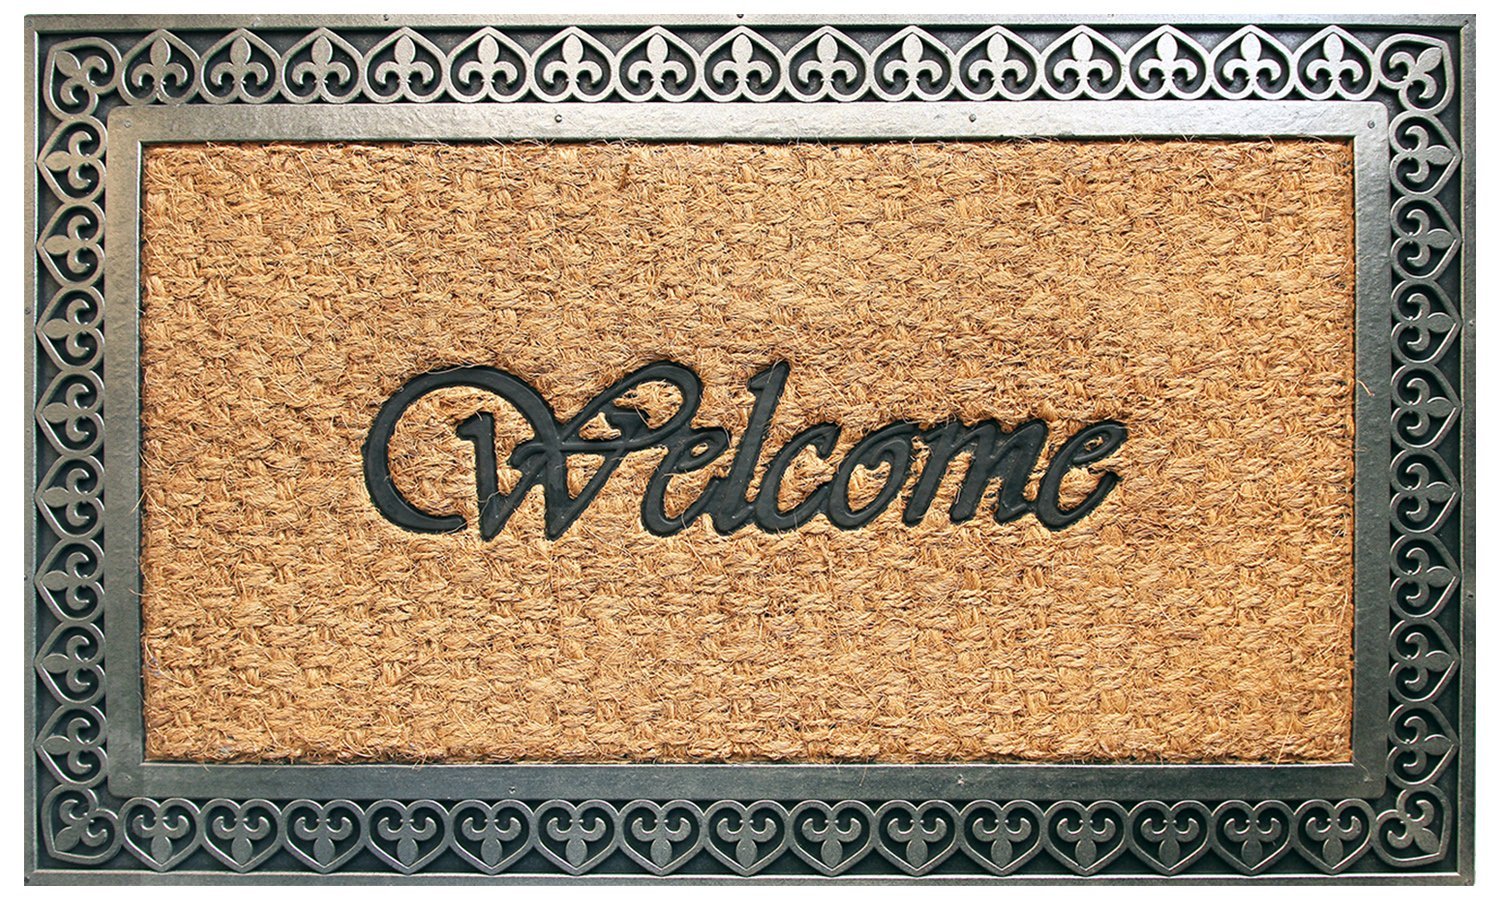 Elegant "Welcome" Printed Natural Coir Door Mat with Cast Iron Design Moulded Rubber Border - OnlyMat